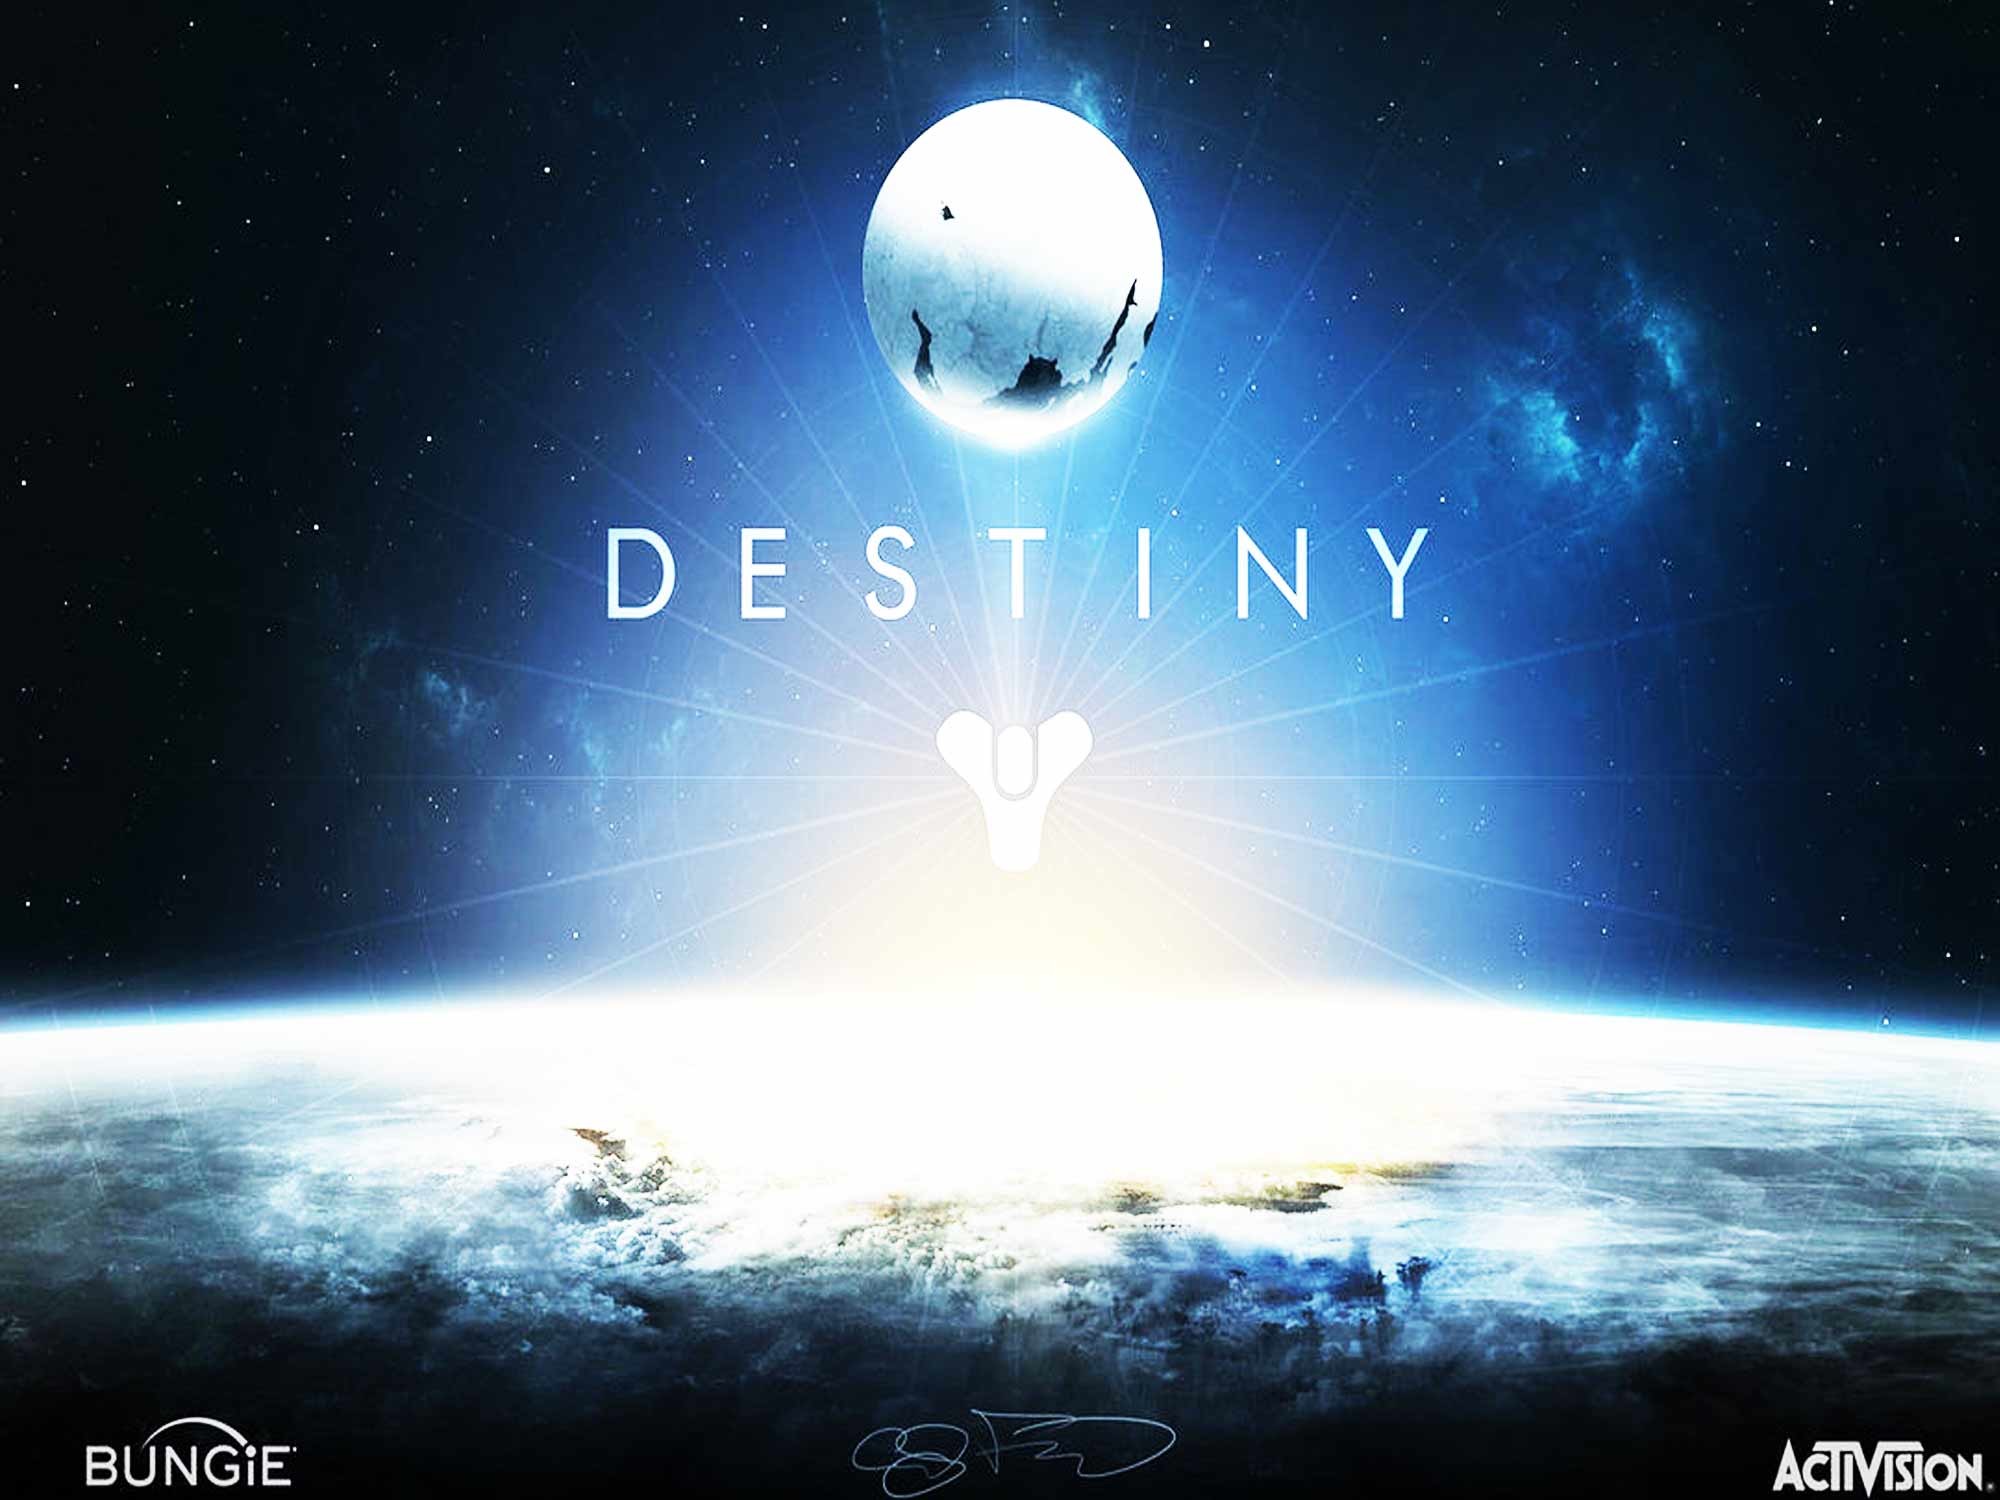 2000x1500 Destiny Bungie Wallpaper HD - WallpaperSafari destiny xbox wallpapers by  martin driver one year ago email .